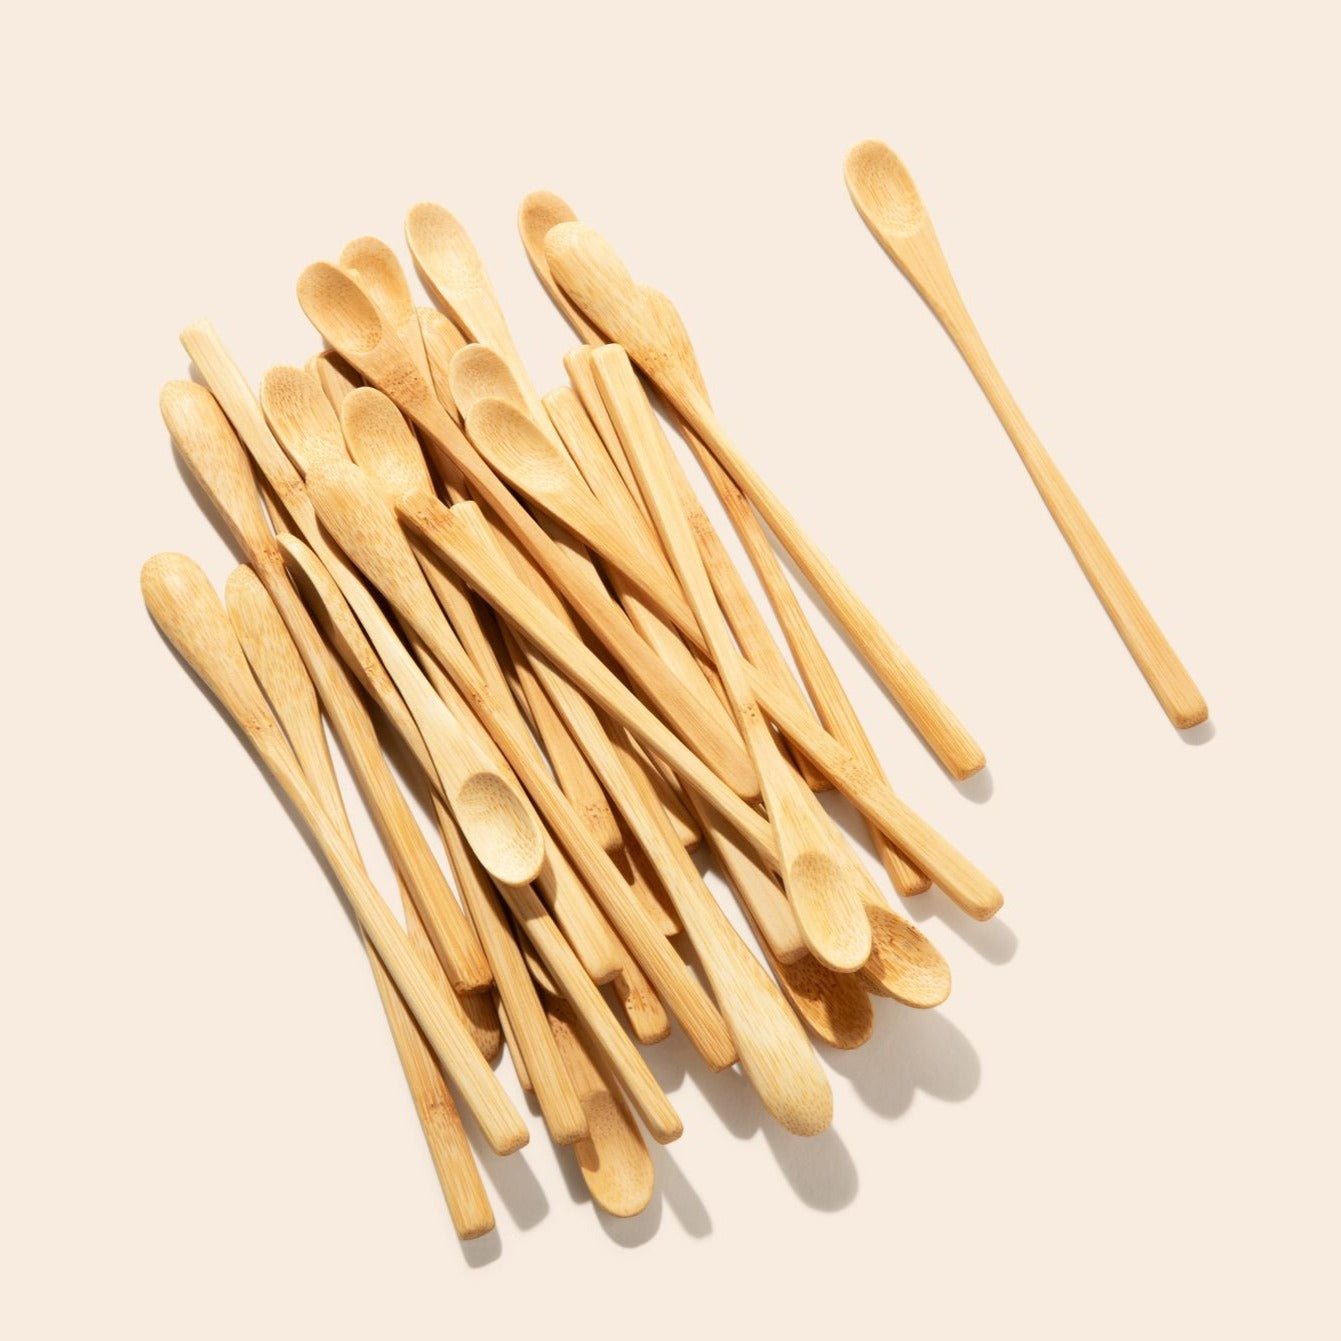 sustainable, zero waste, earth-friendly, plastic-free Bamboo Spoon | Long Stir Spoon - Bamboo Switch